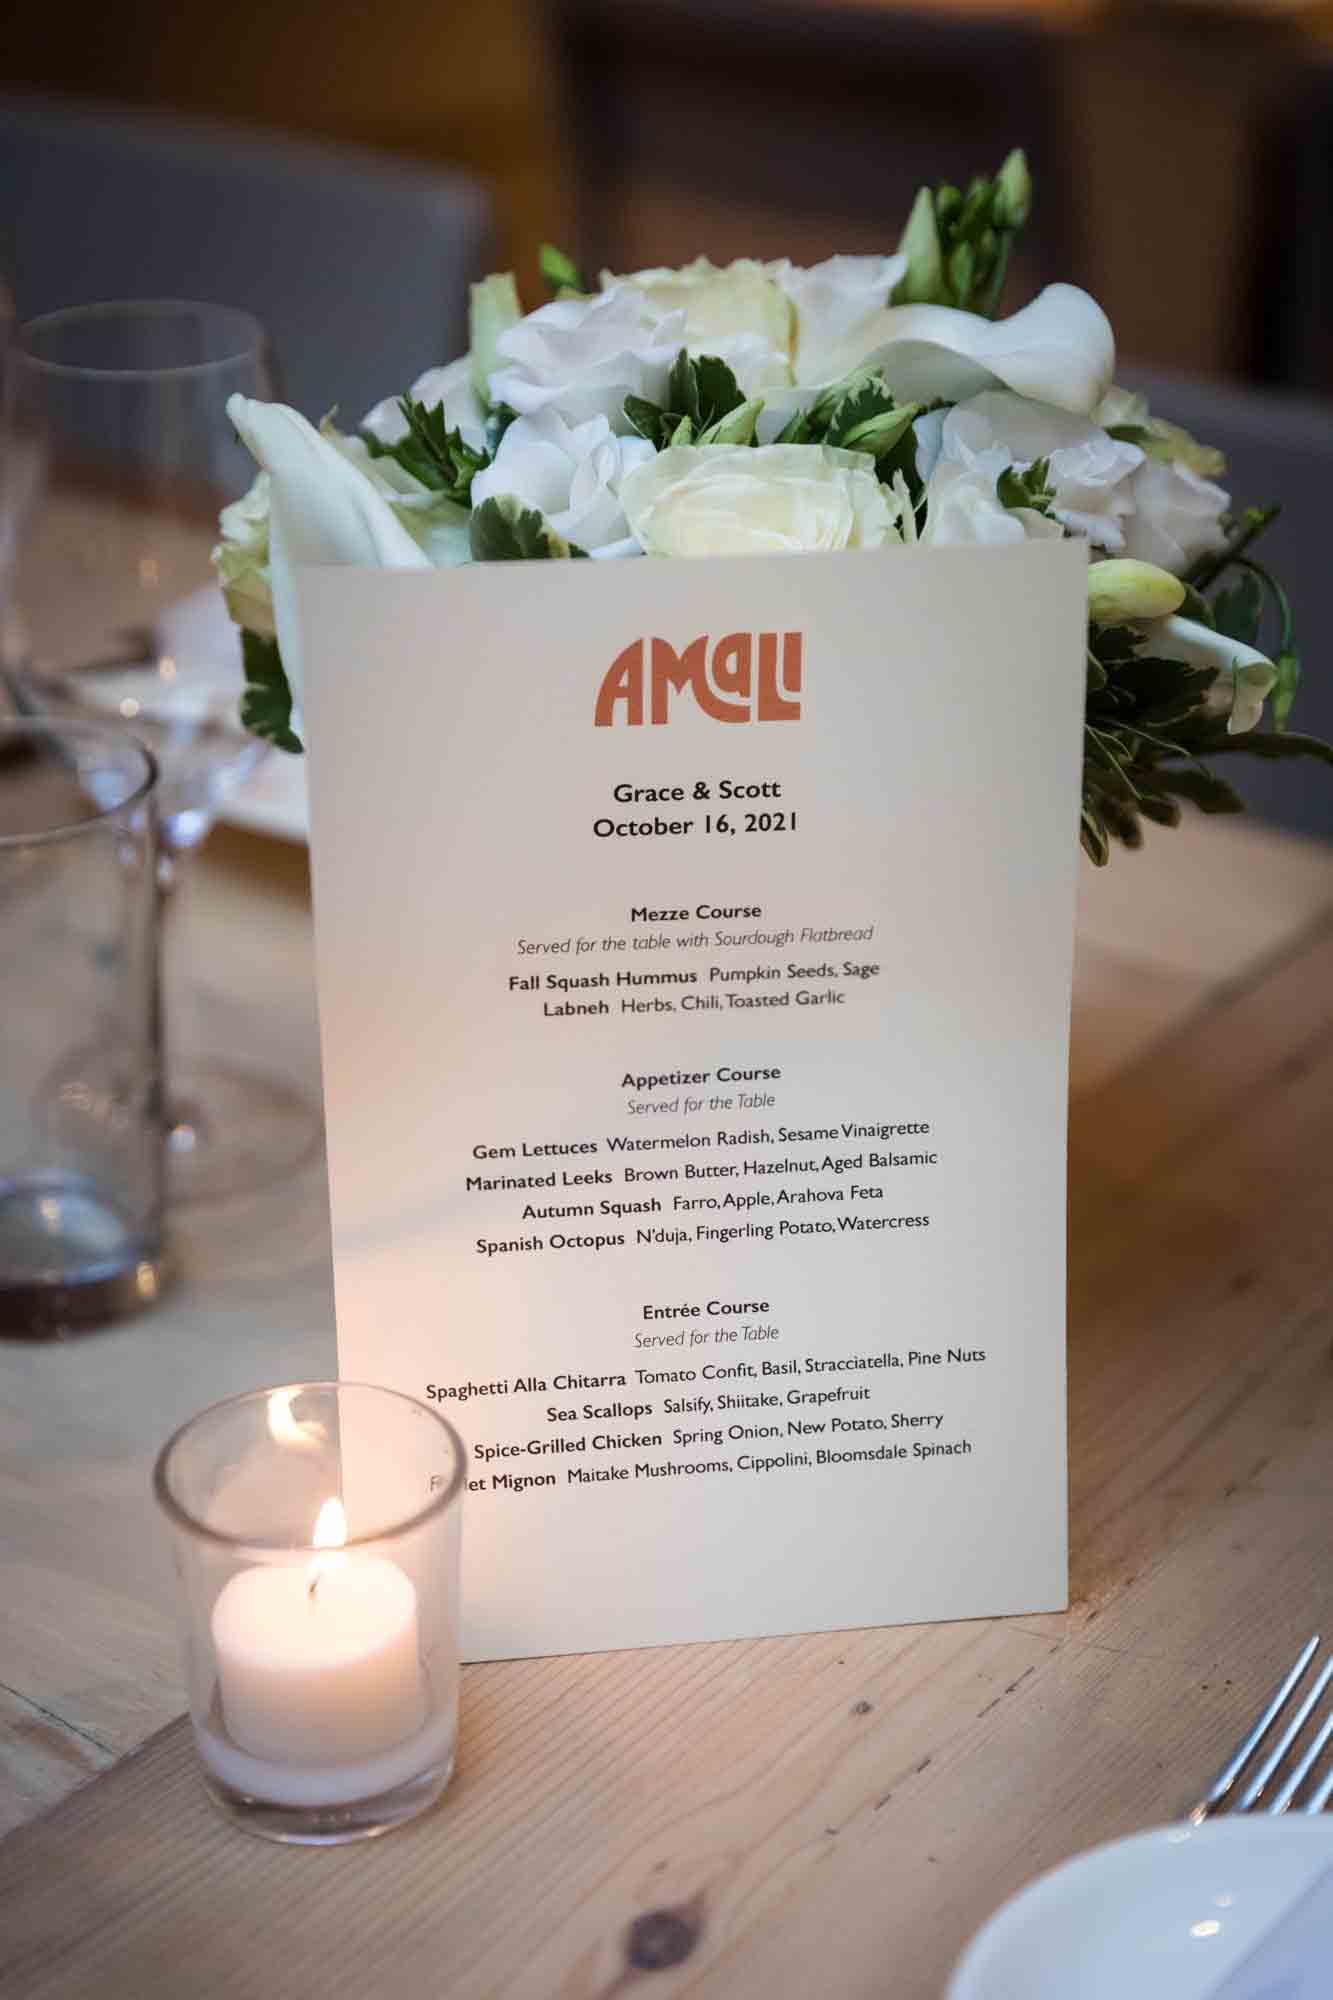 Menu card in front of flower centerpiece on table at Amali Restaurant